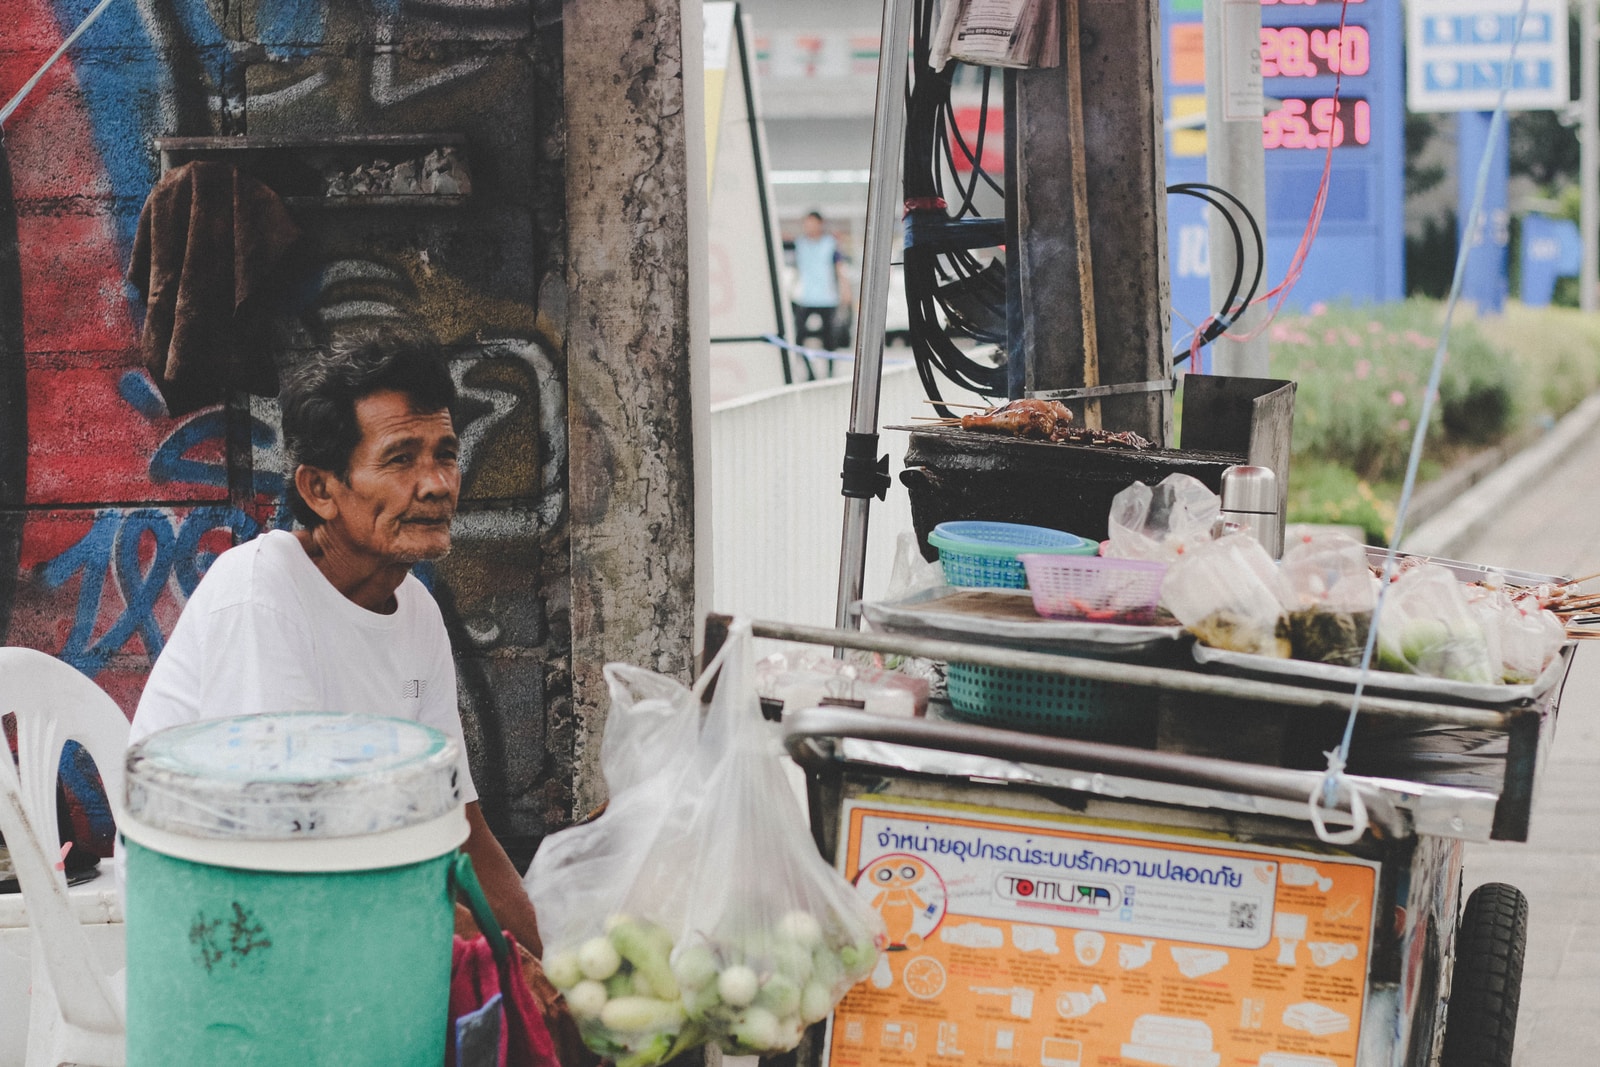 man in white top sitting in front of food stall